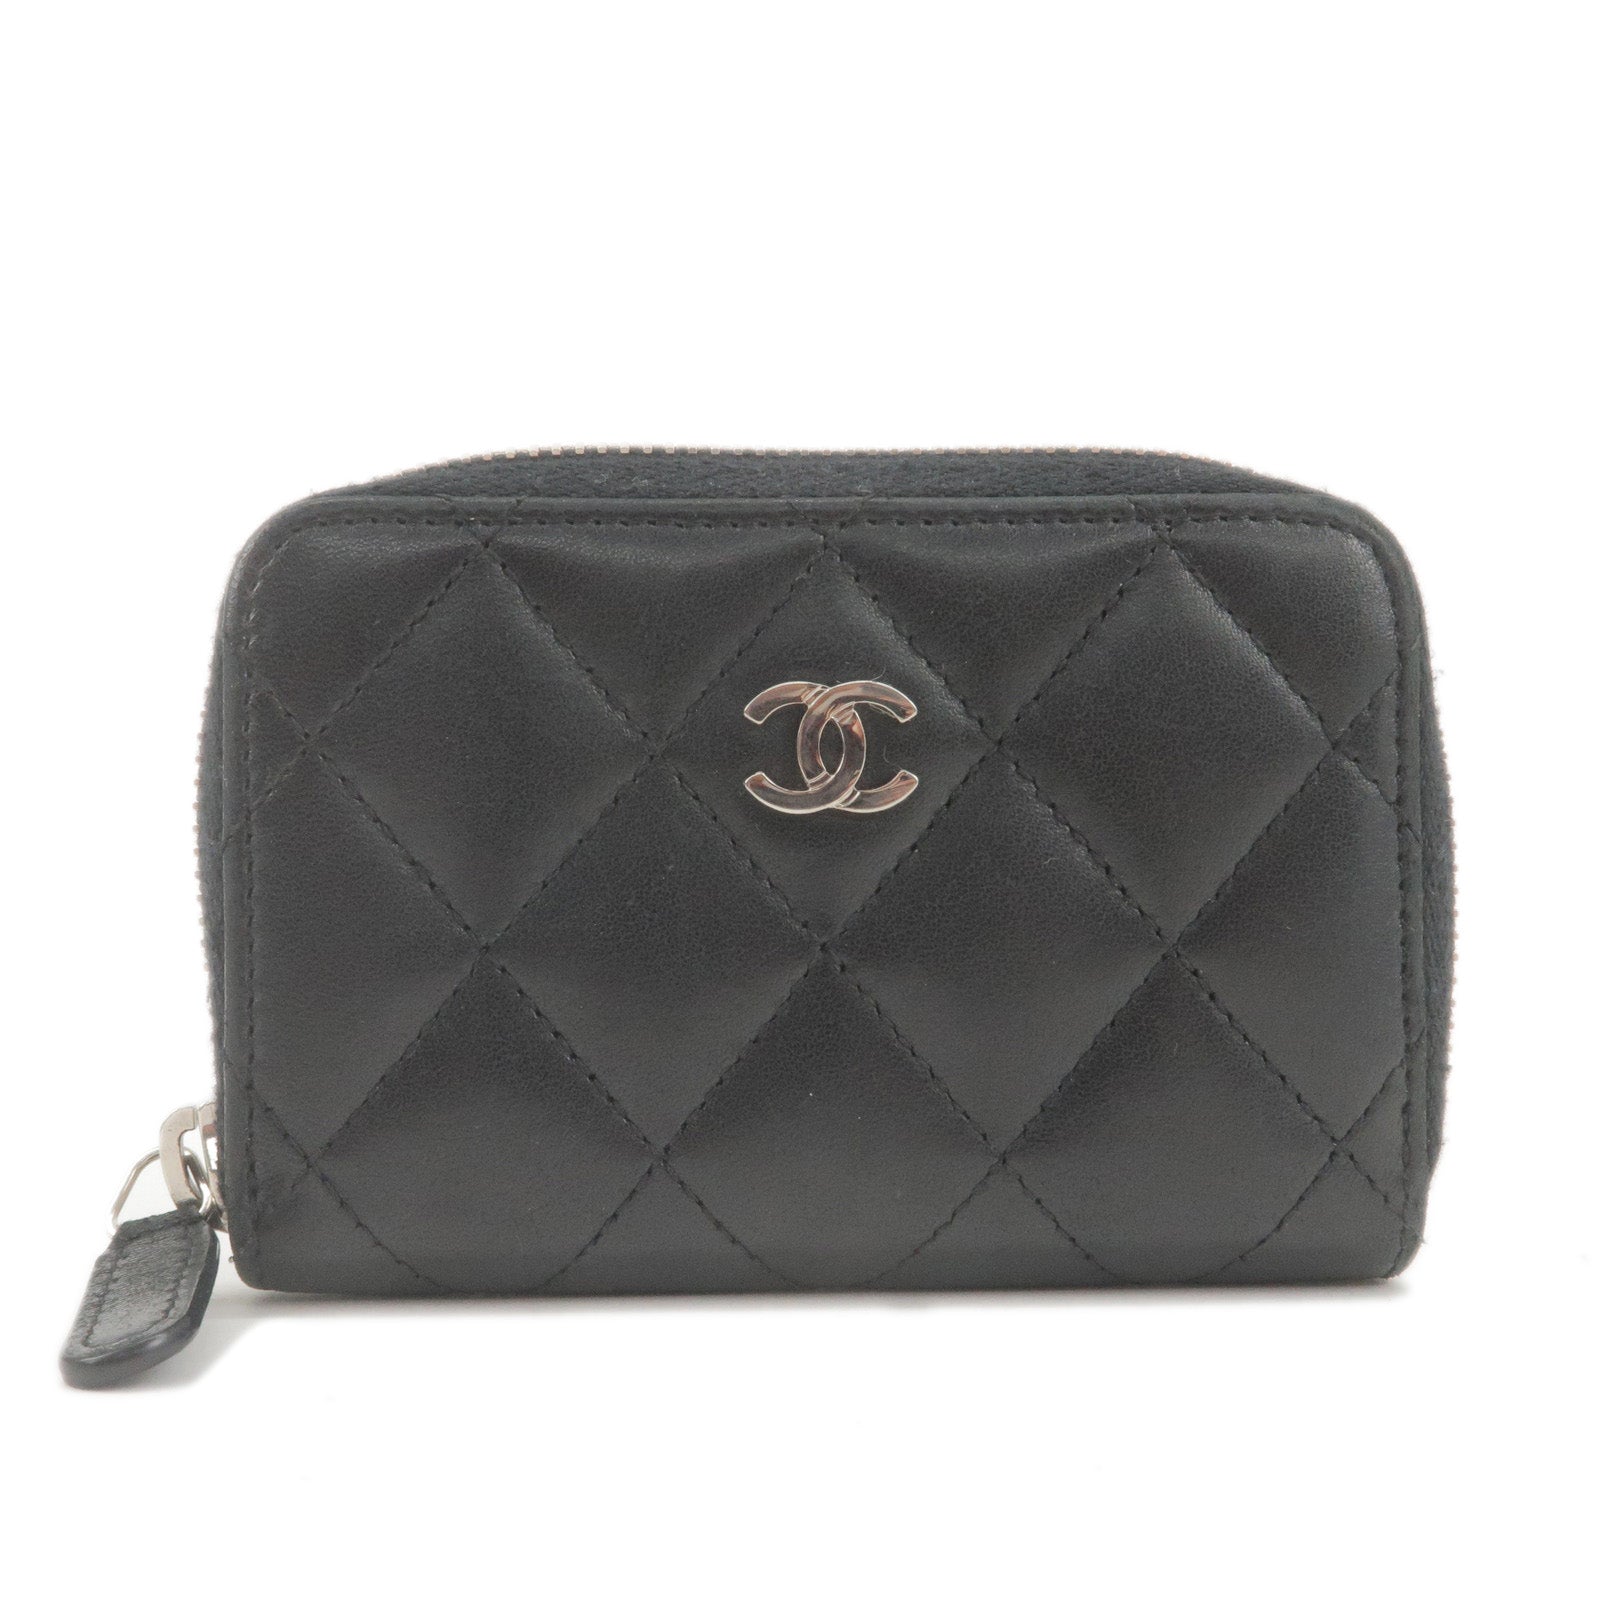 Shop CHANEL Coin Cases (AP3521 B13703 NQ337) by LESSISMORE☆